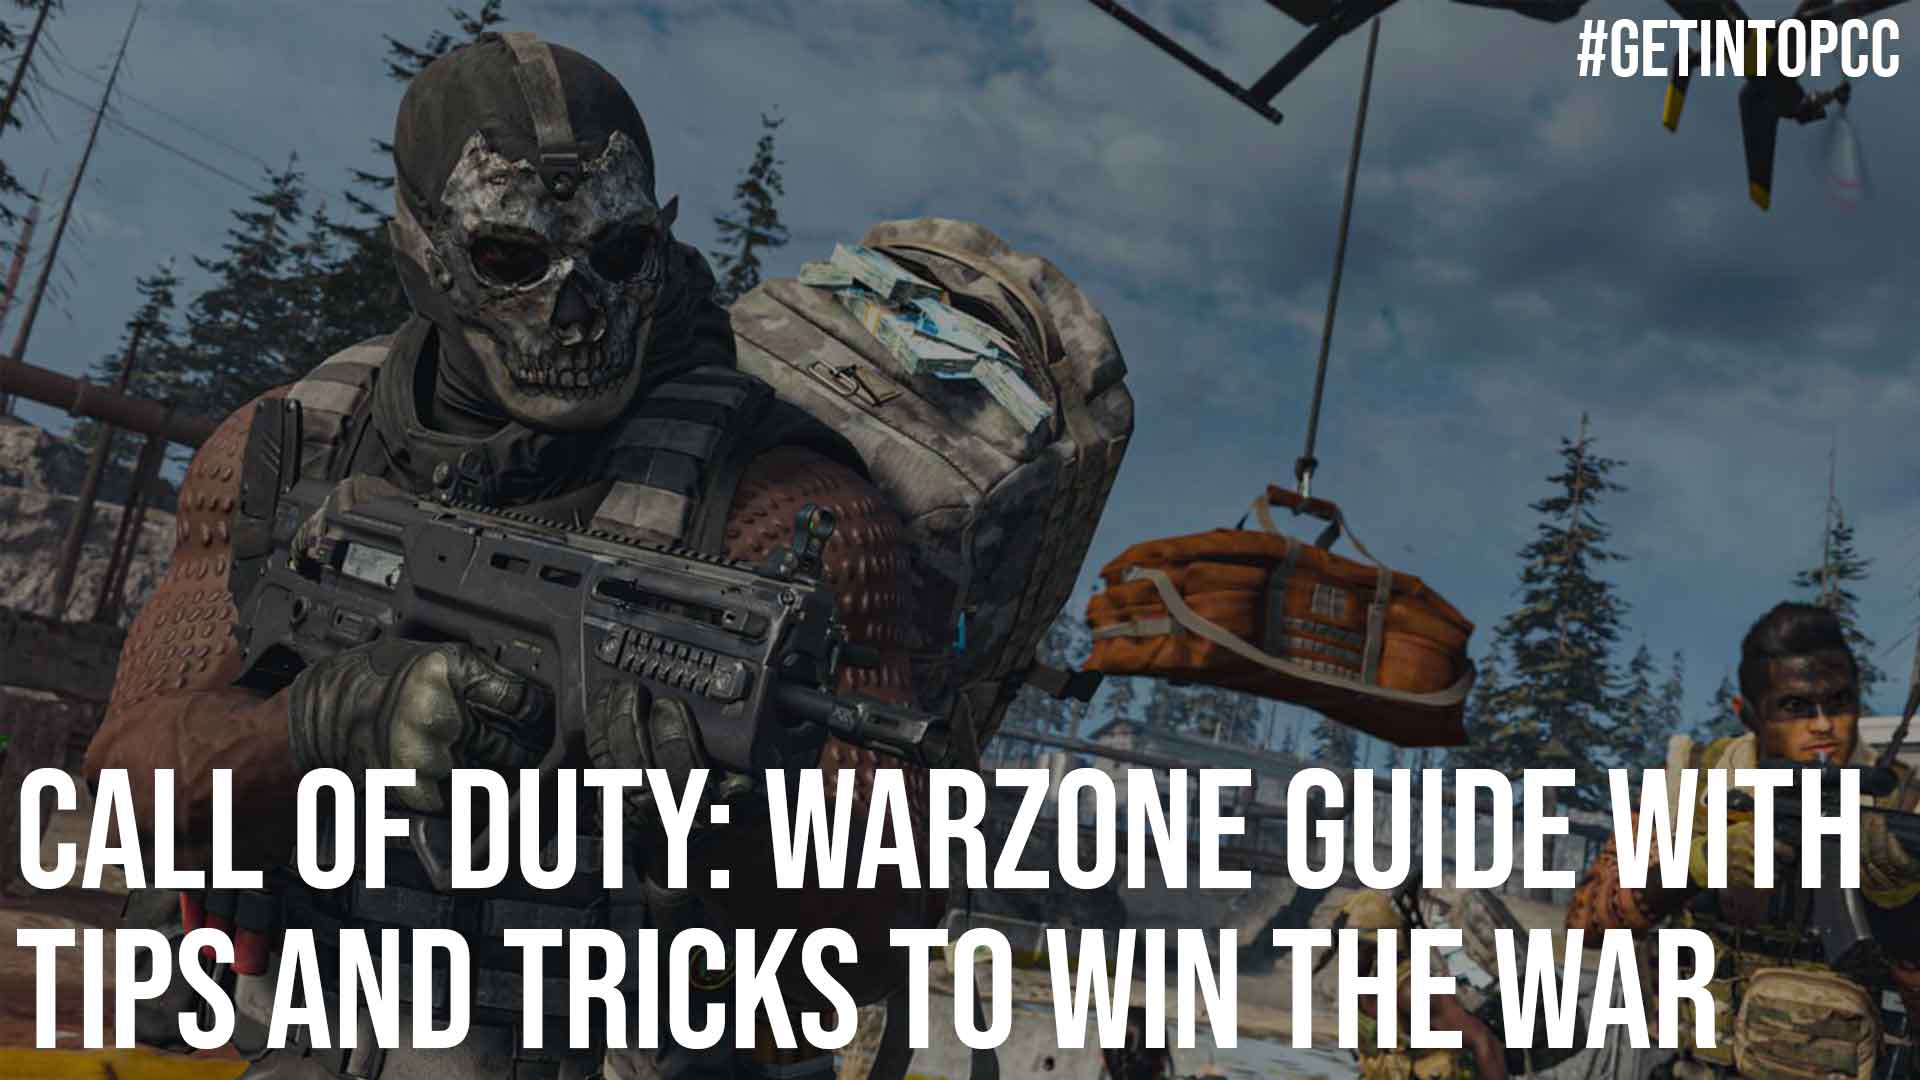 Call of Duty Warzone Guide with Tips and Tricks to Win the War